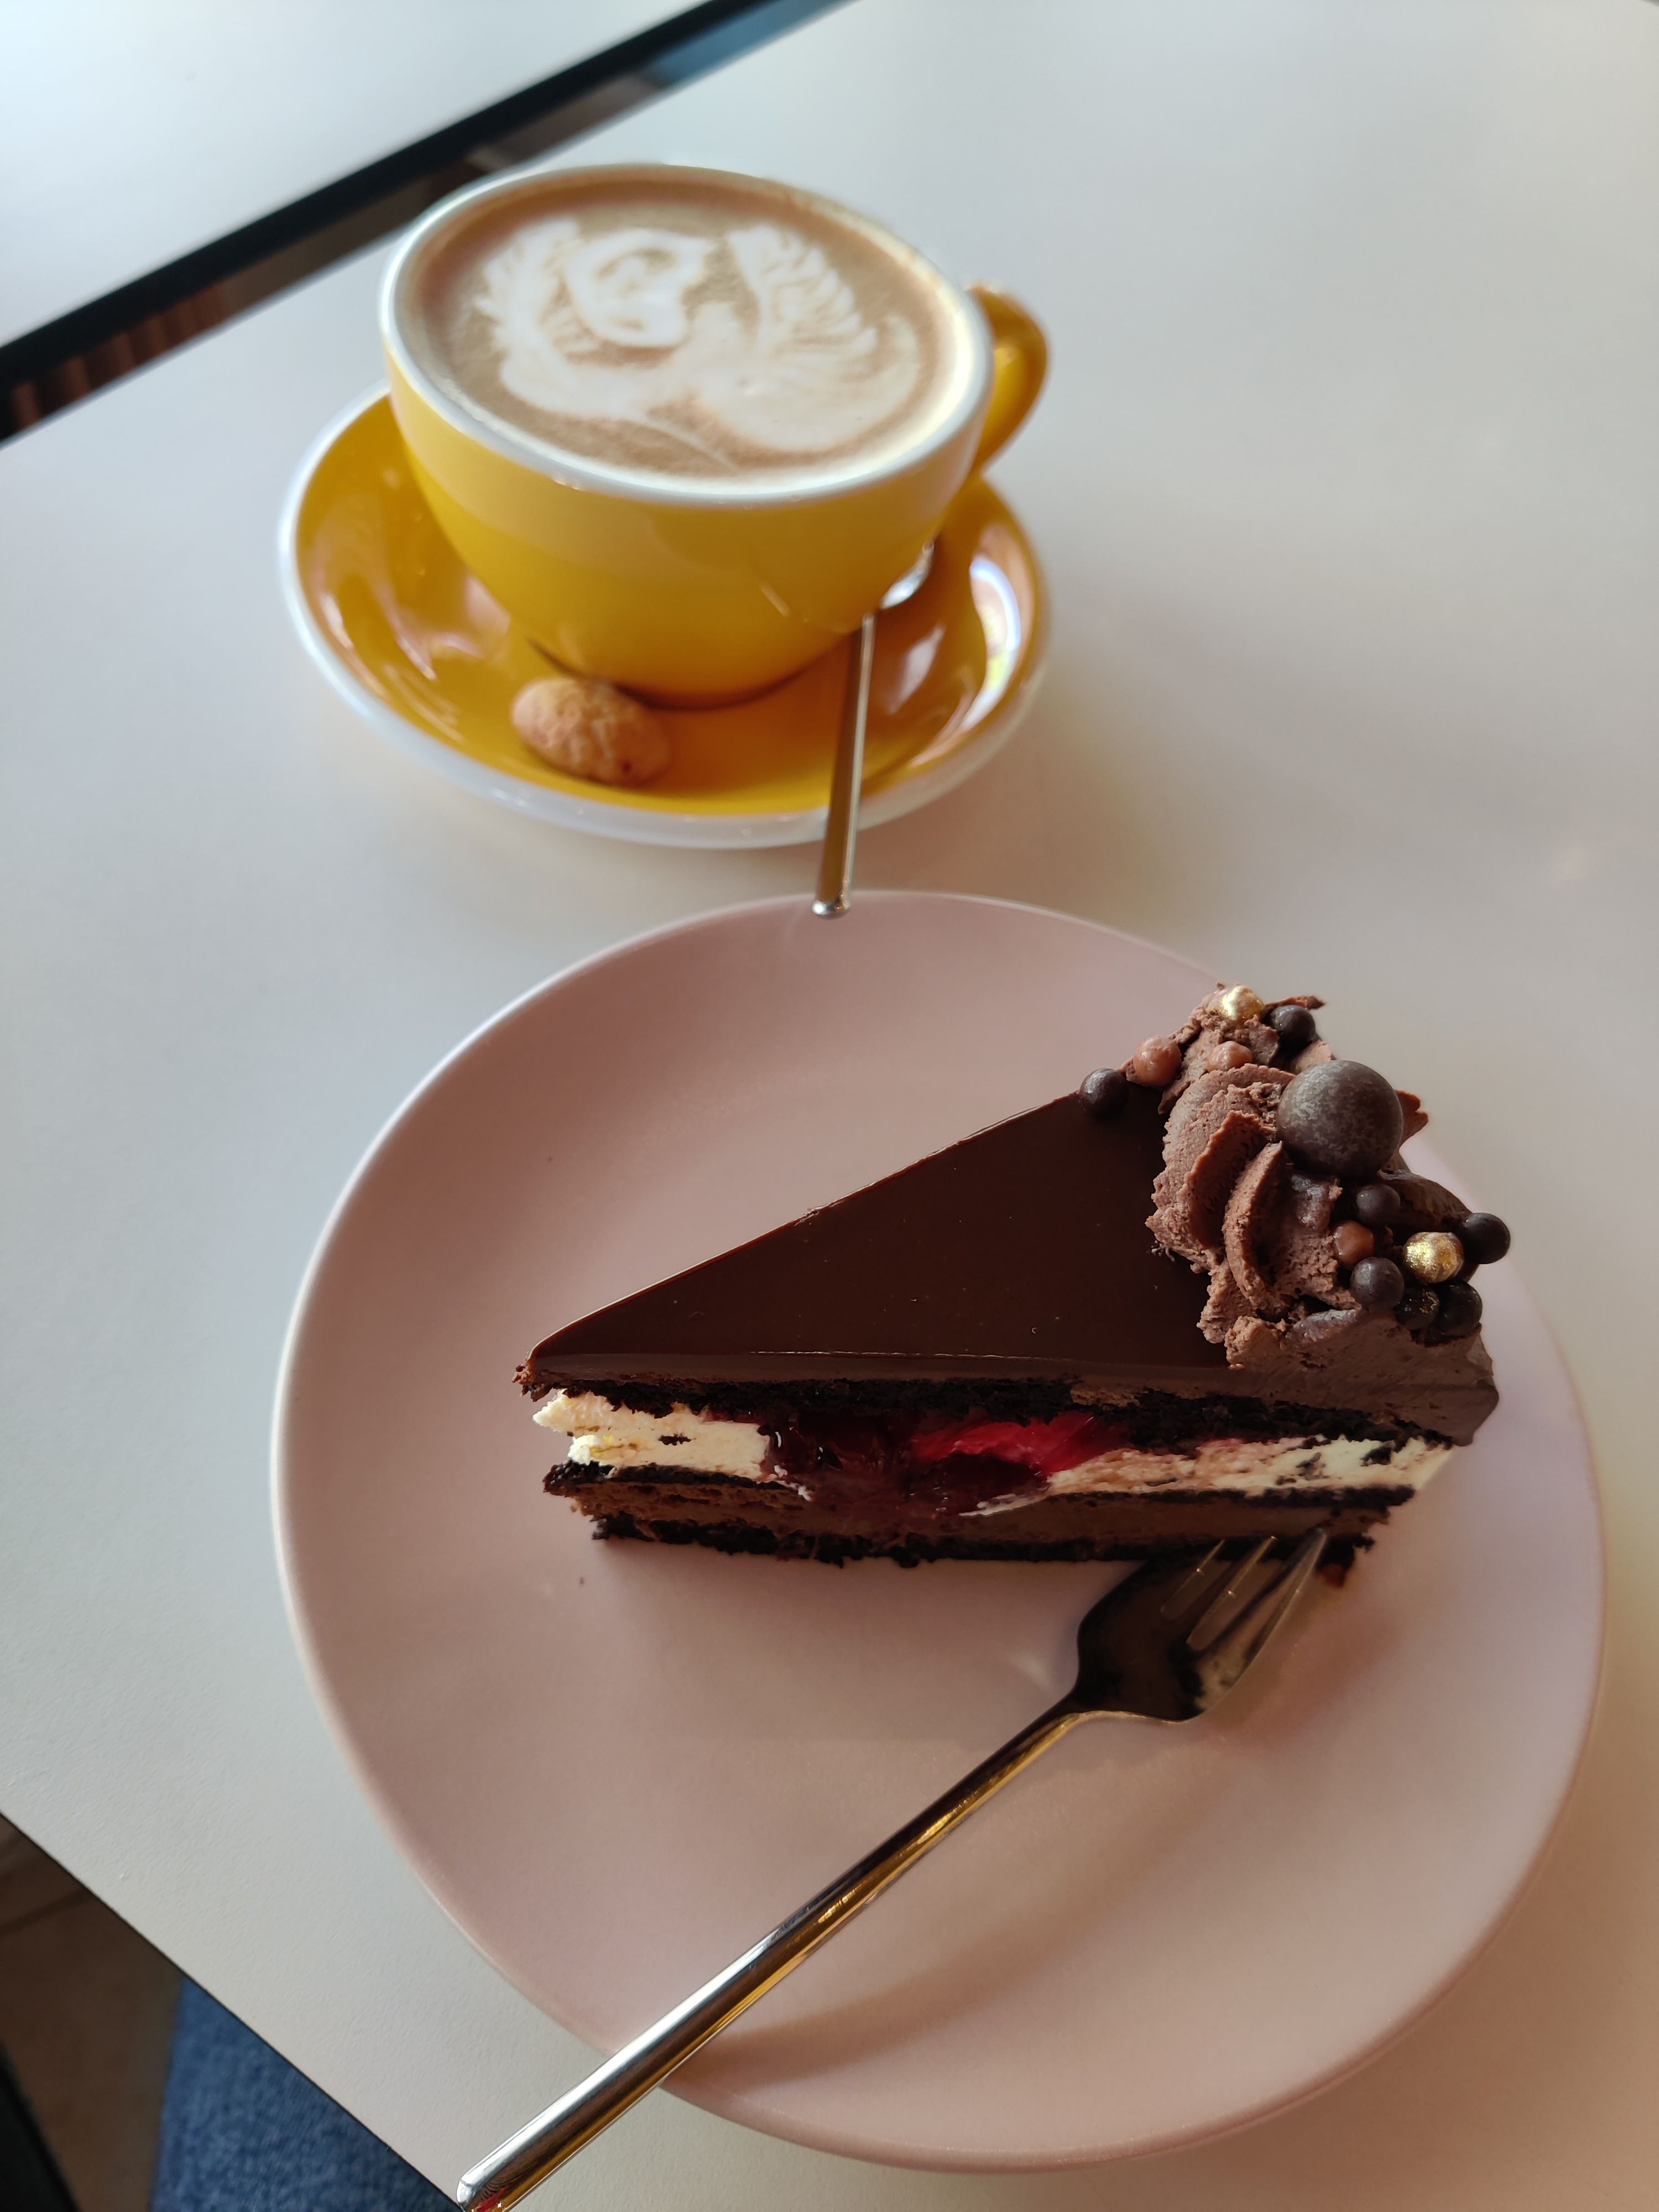 Cherry by Mary - Coffee and Cake